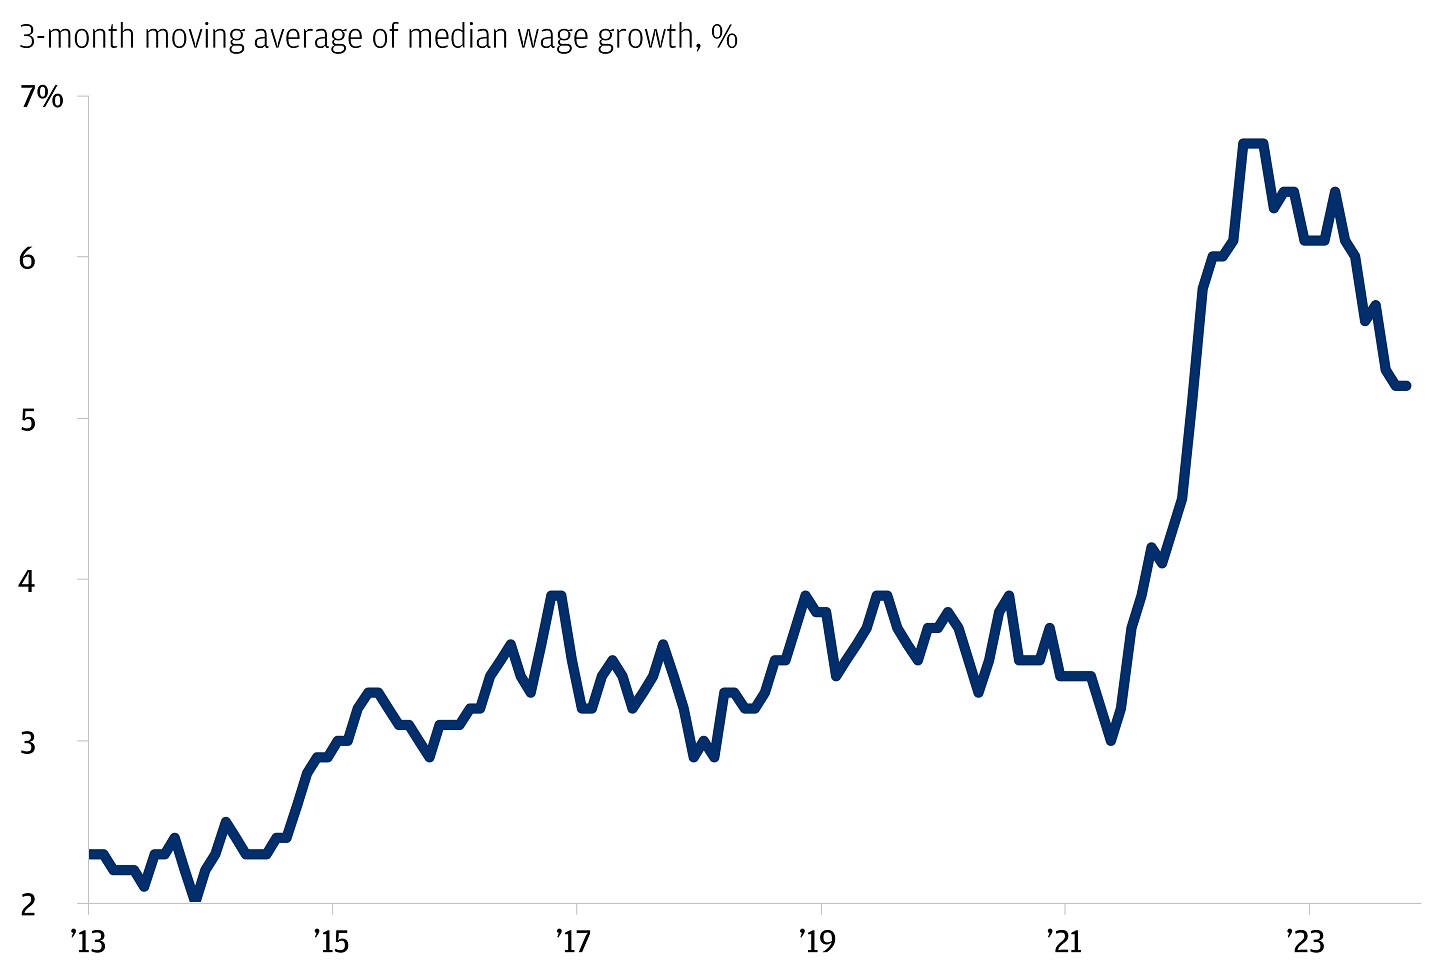 Line chart showing the 3-month moving average of median wage growth, from 2013 to 2023 in the United States.